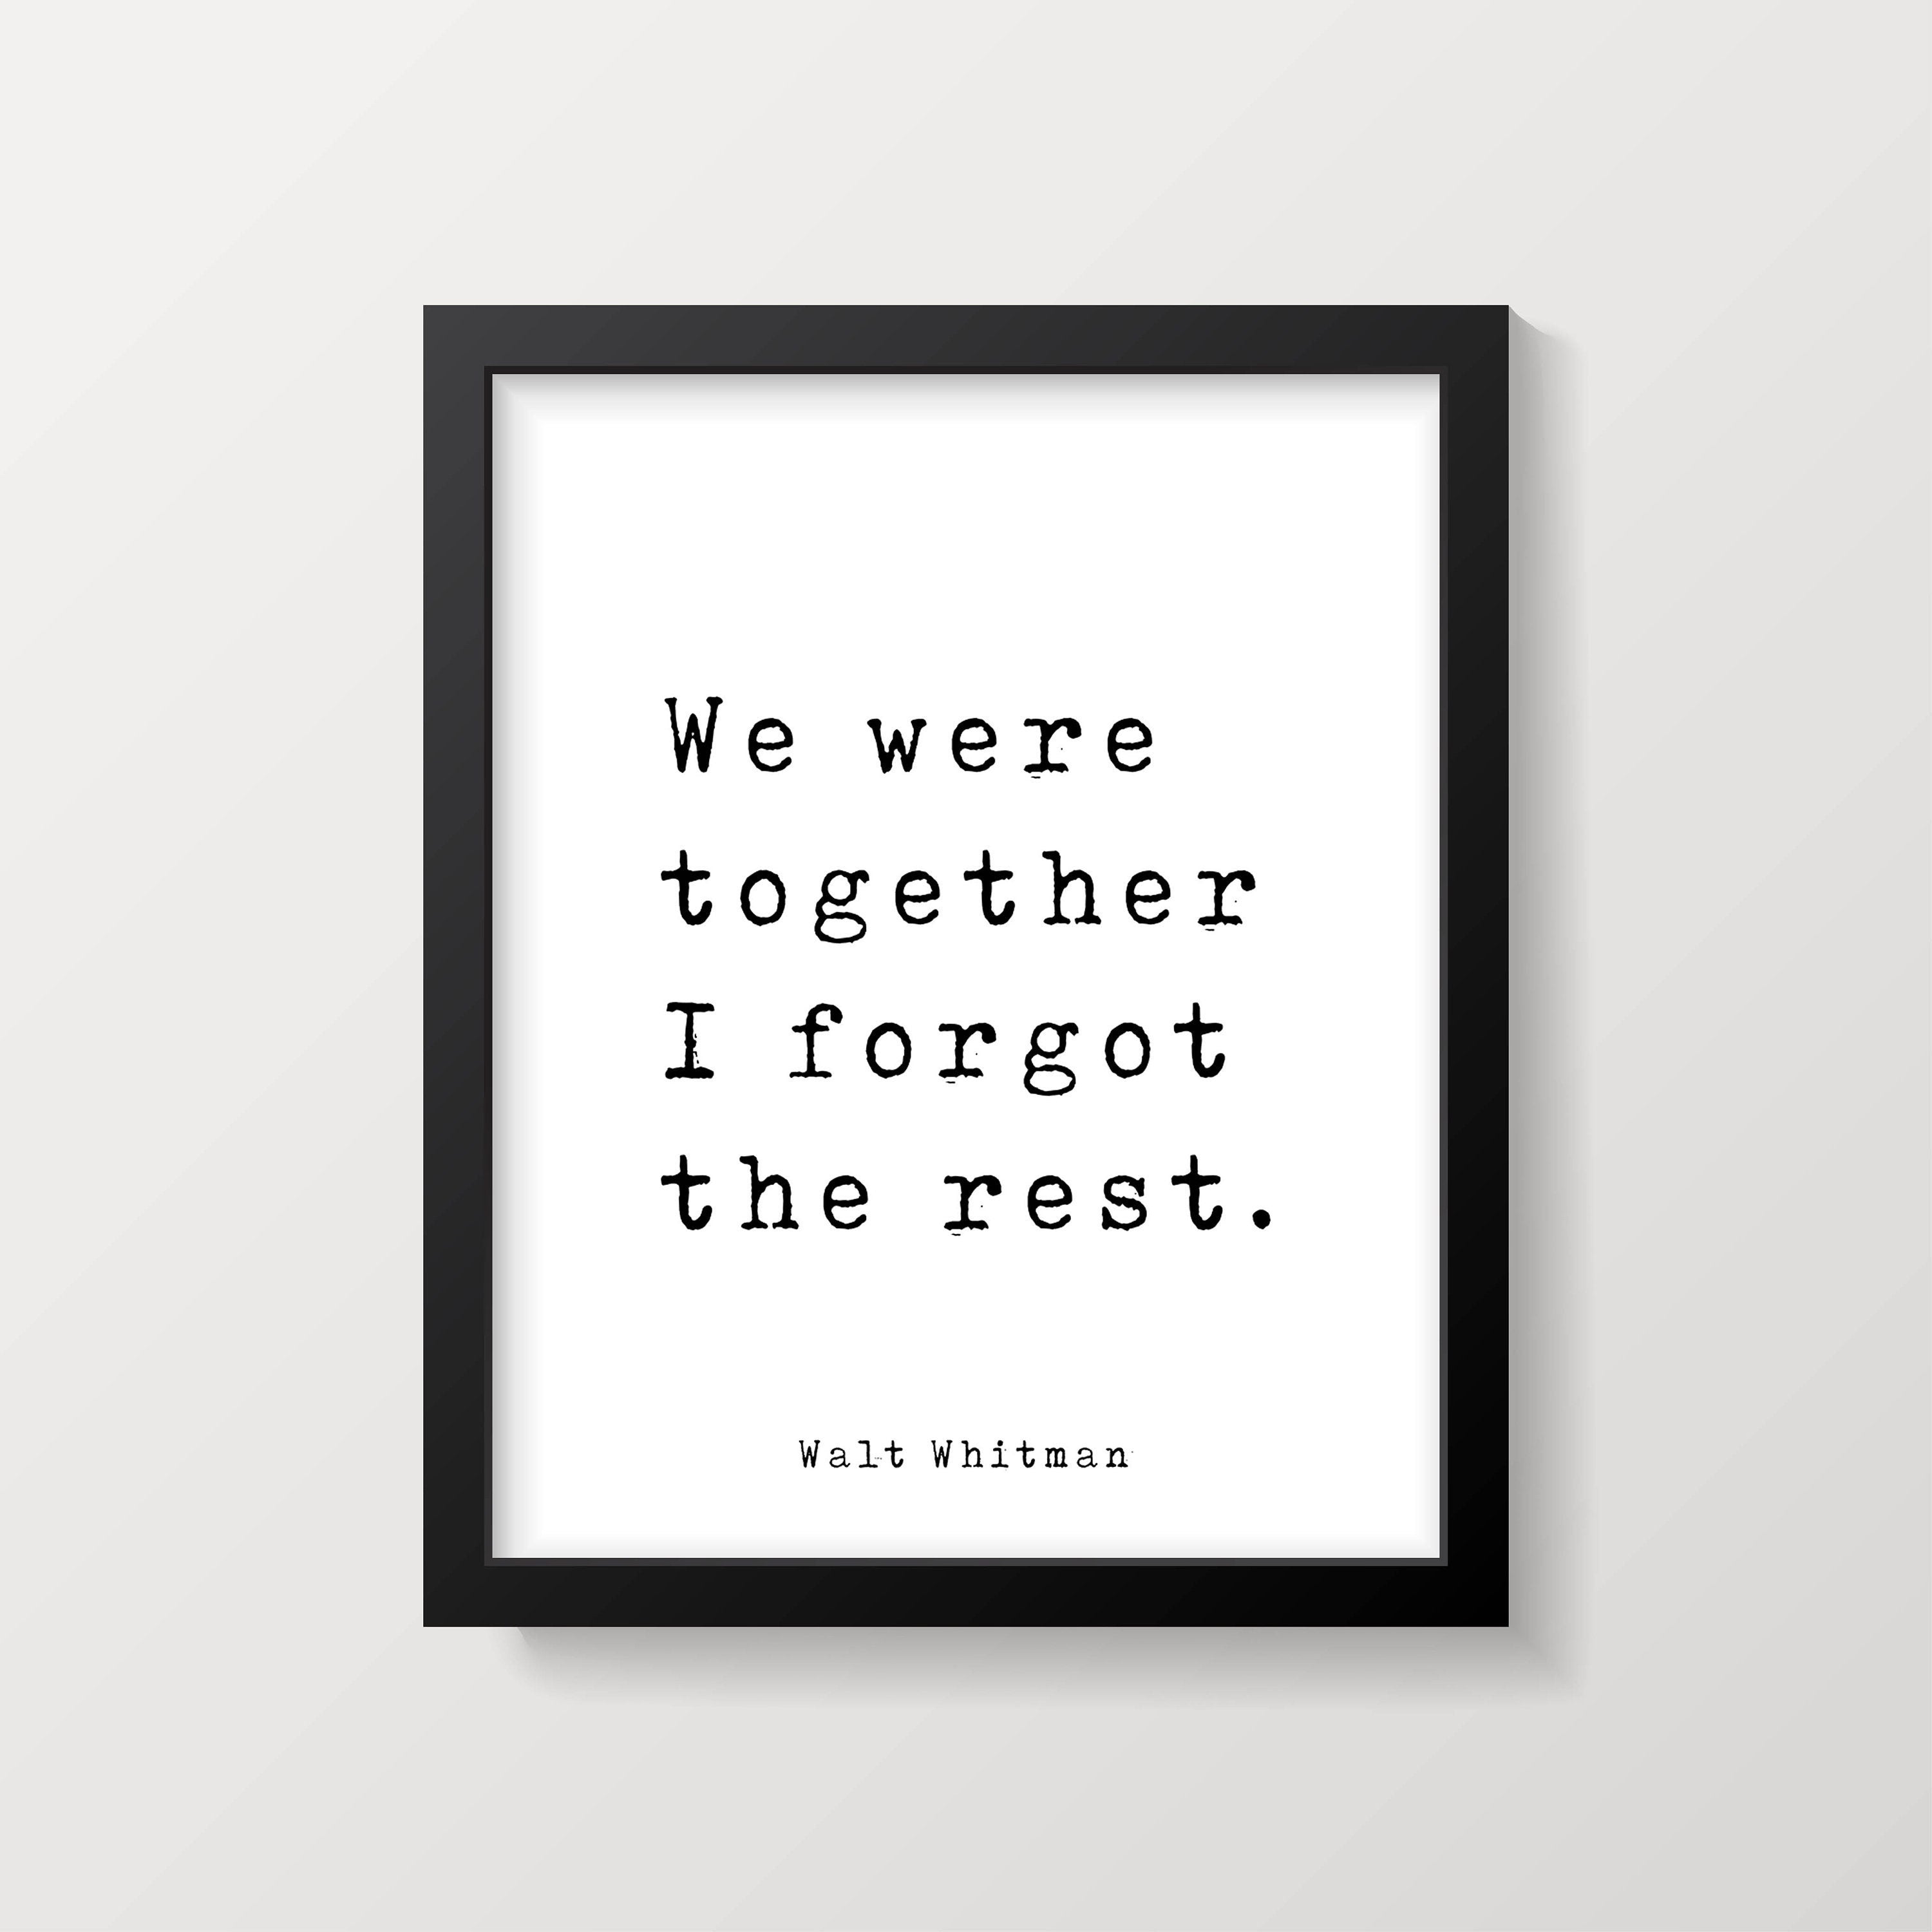 Walt Whitman Quote Print, We were together I forgot the rest